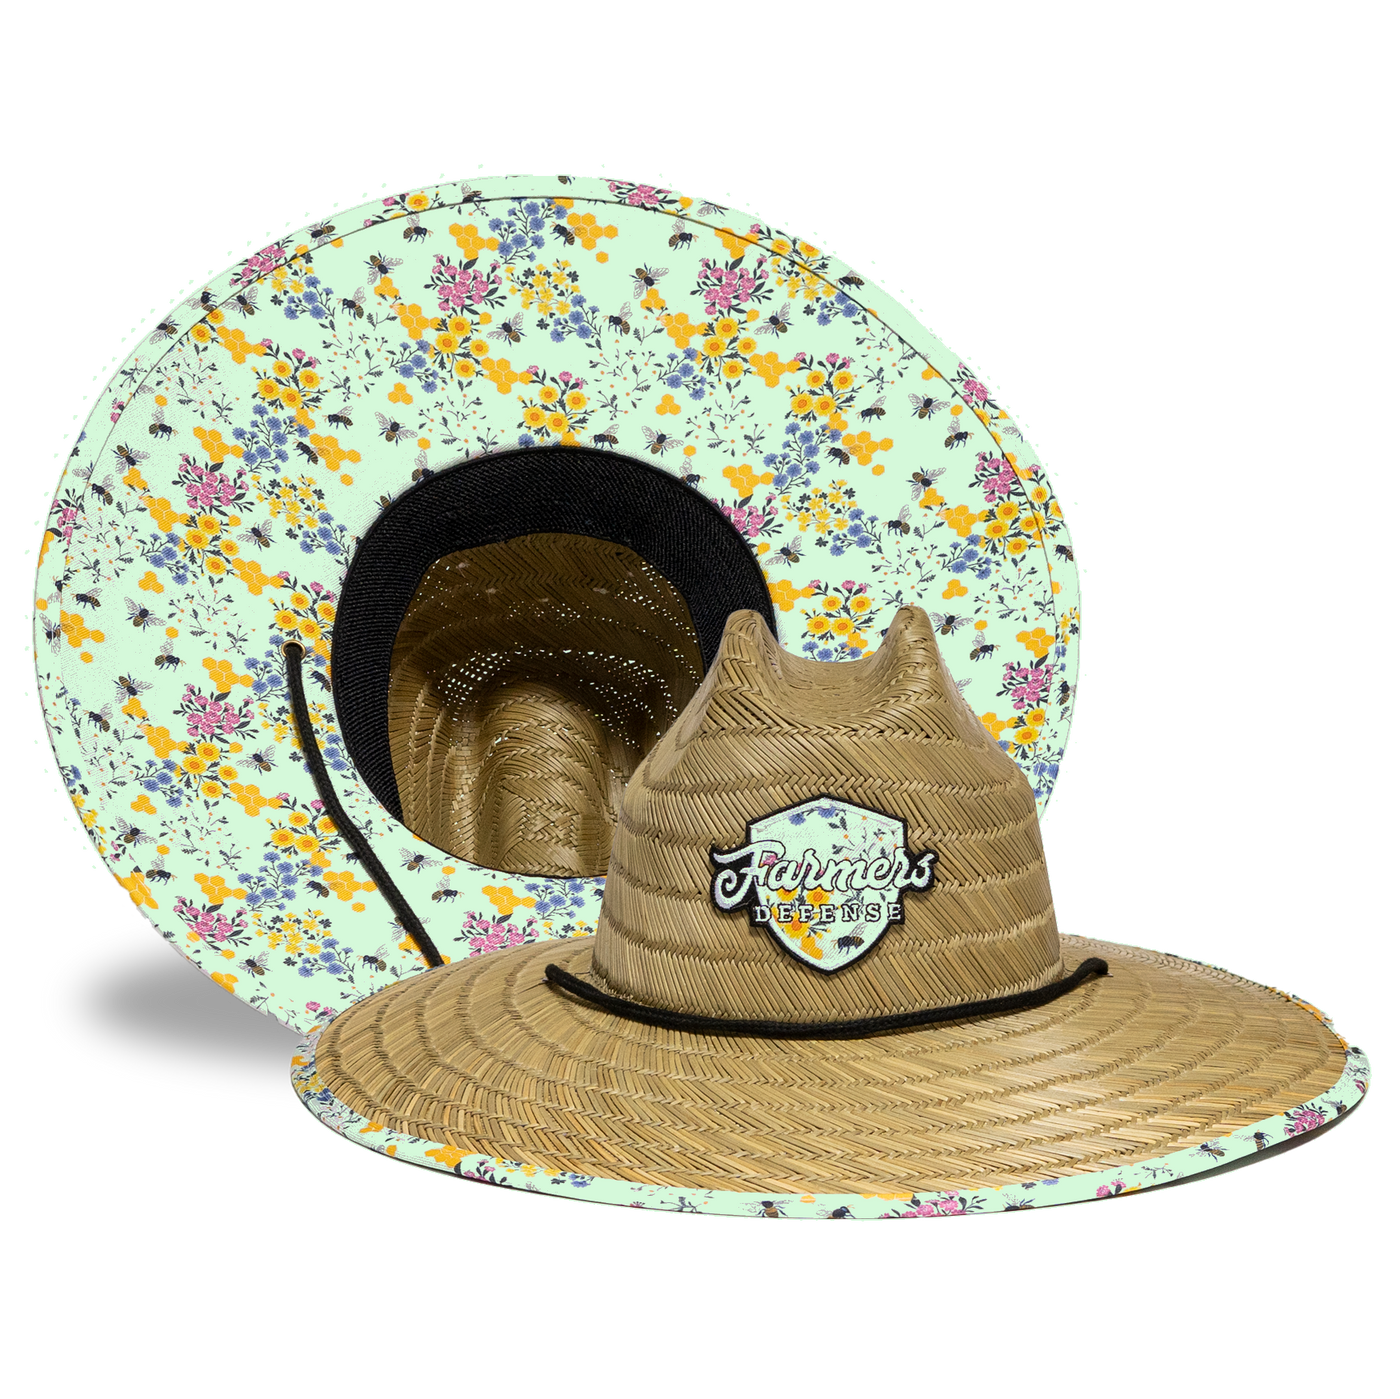 Farmers Defense Straw Hat - Save the Bees - Mint